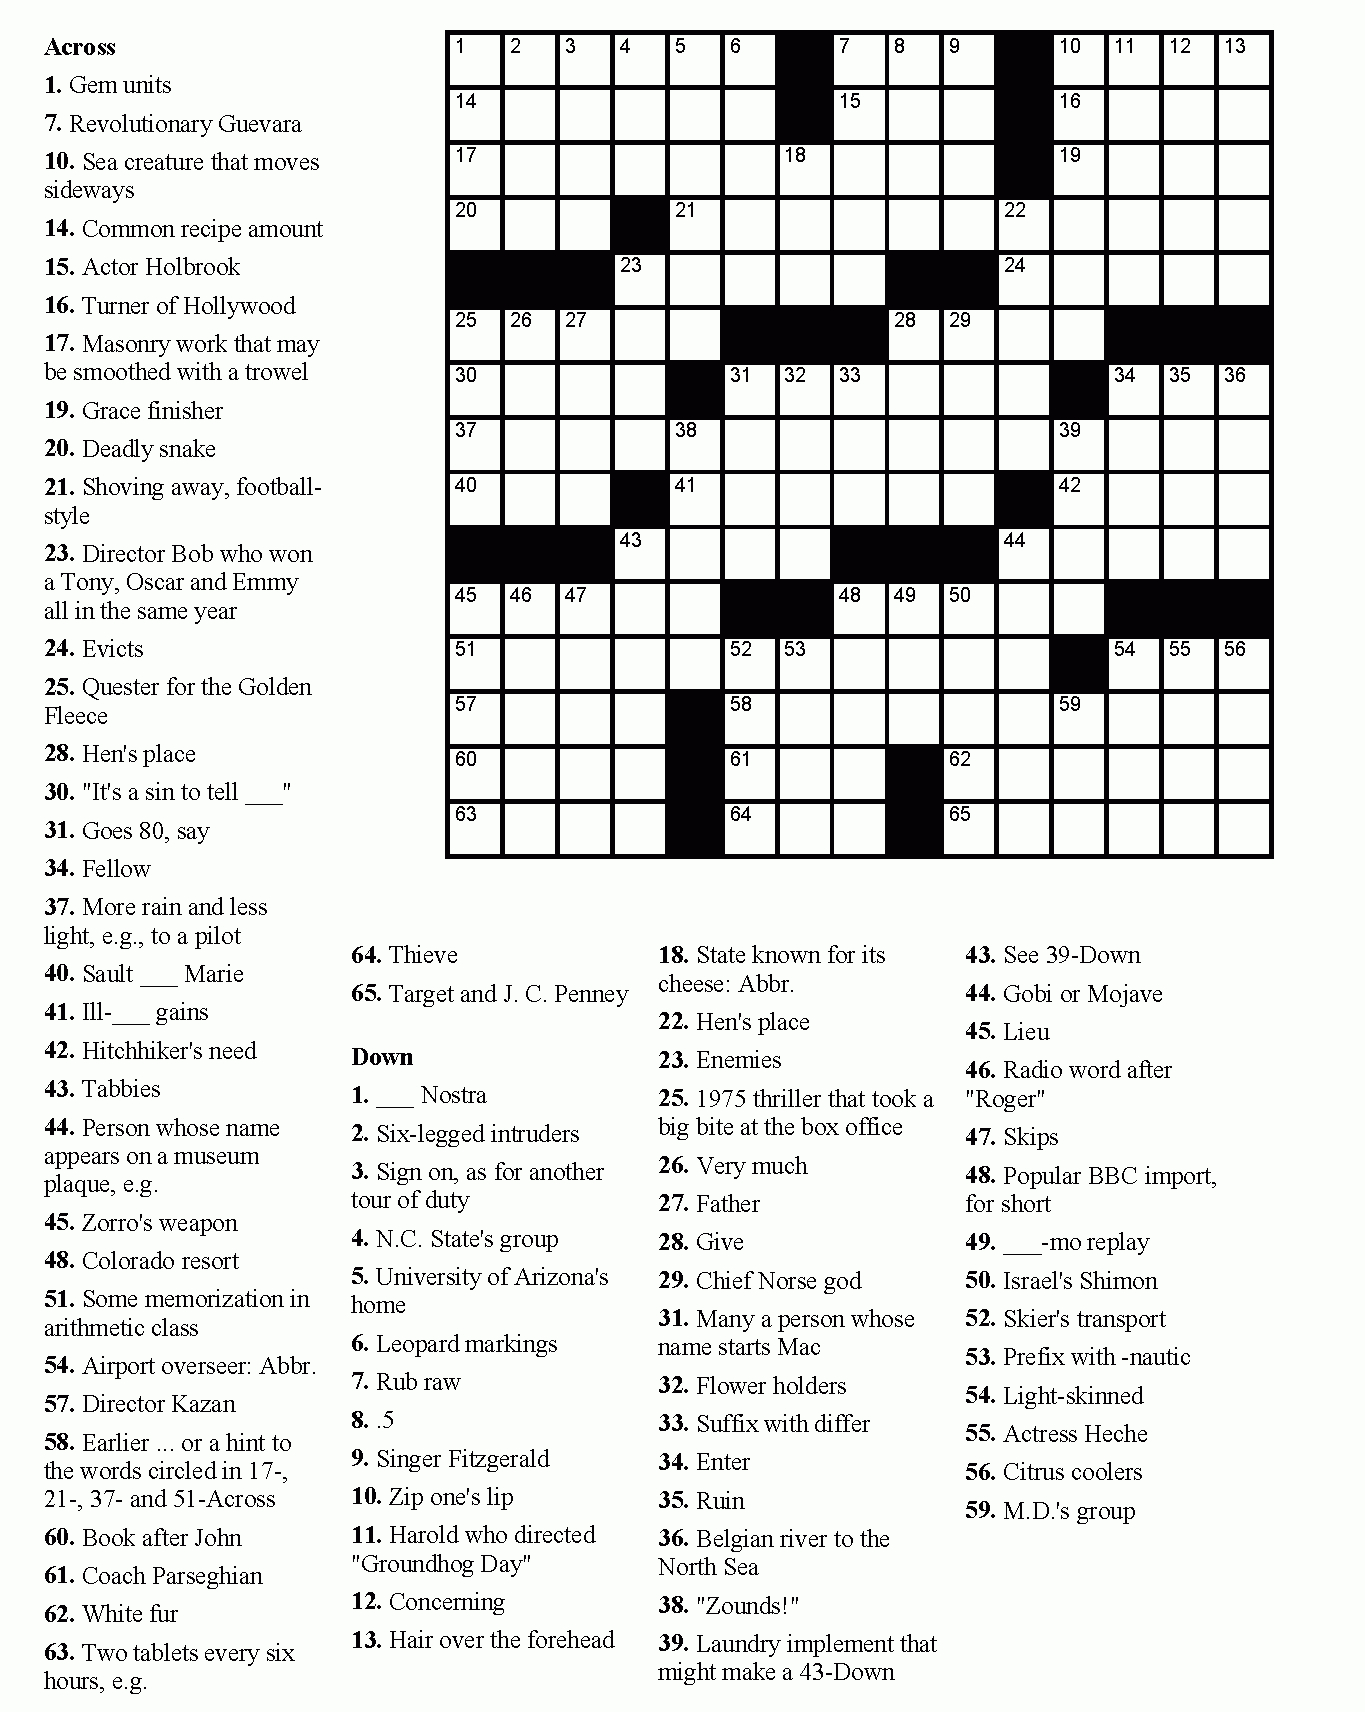 Free Printable Crossword Puzzles Easy For Adults | My Board | Free - Very Easy Printable Crossword Puzzles